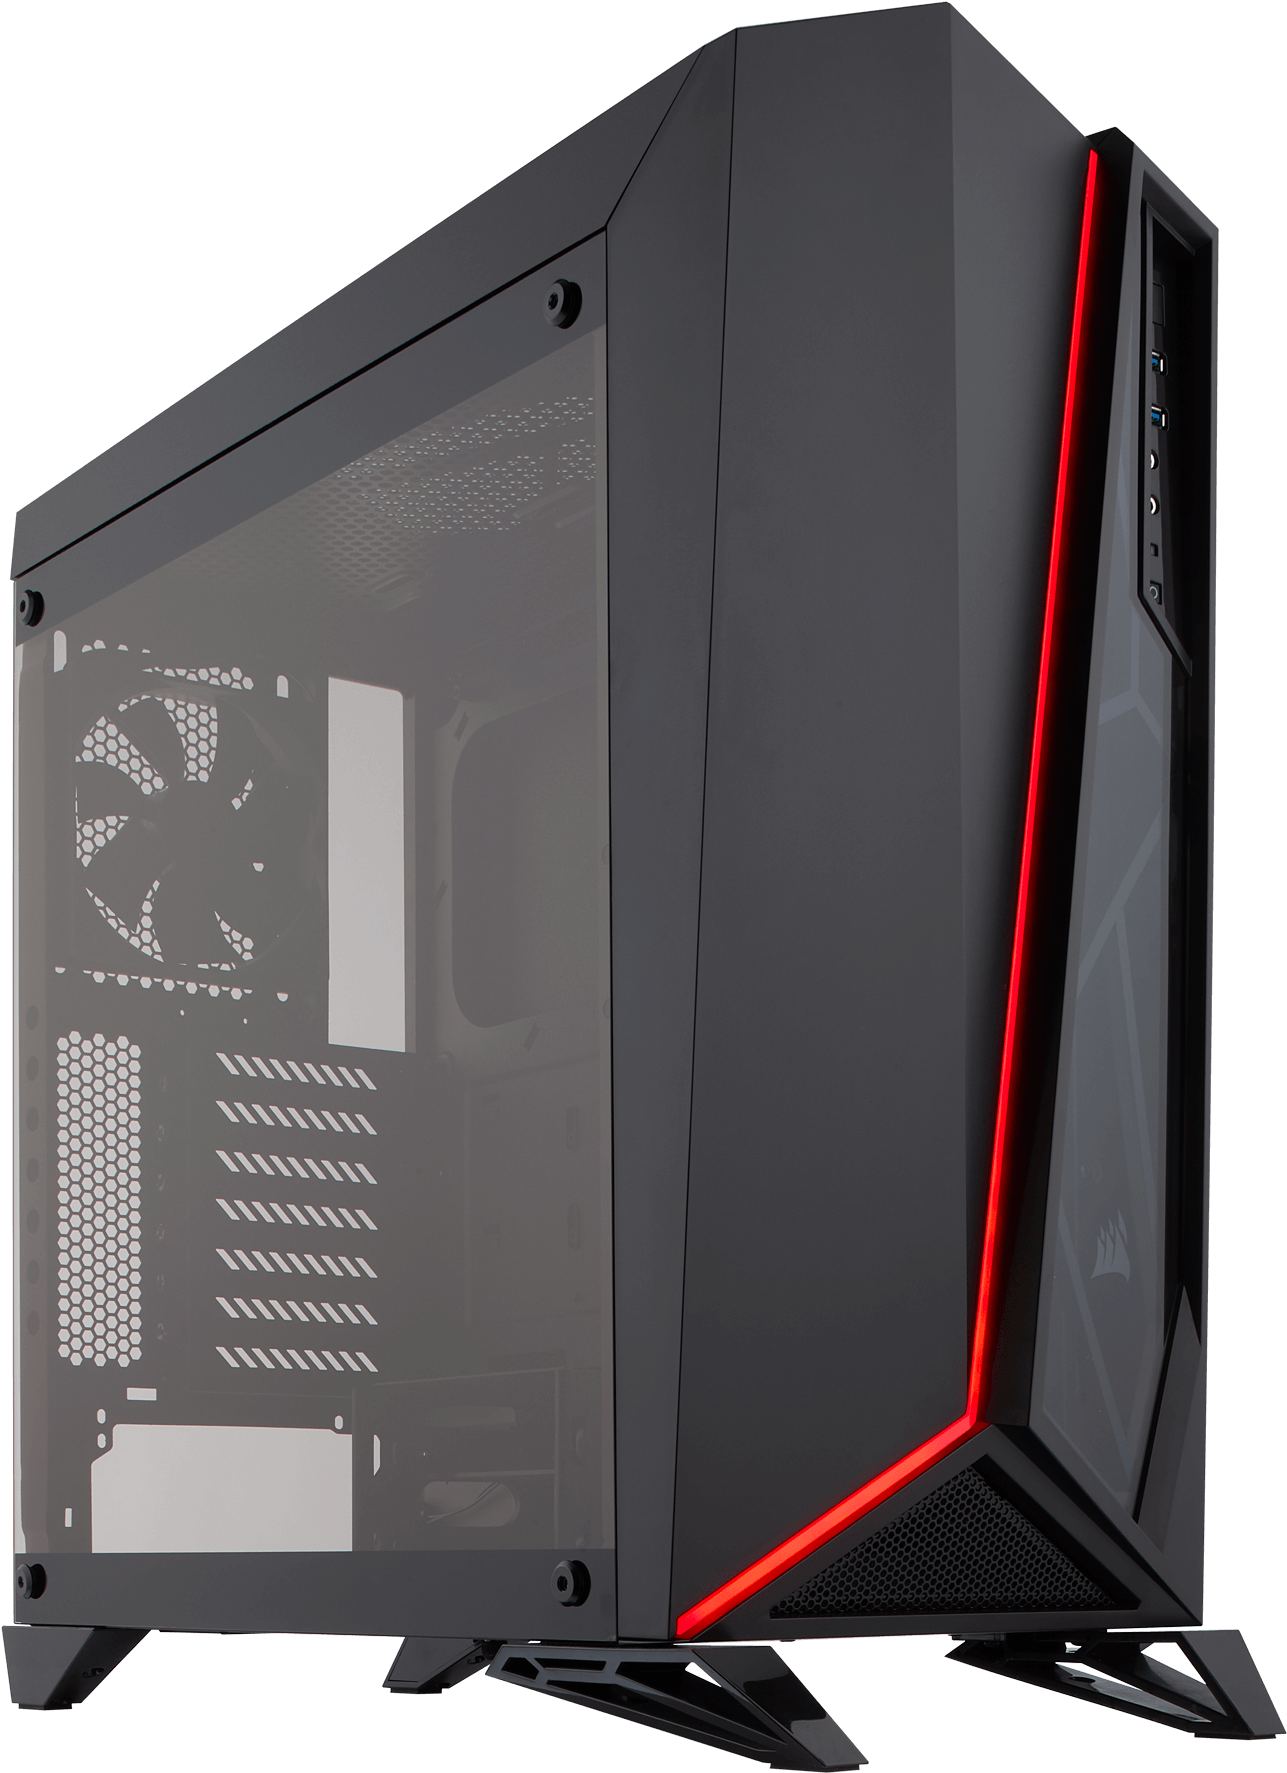 A Black And Red Computer Tower